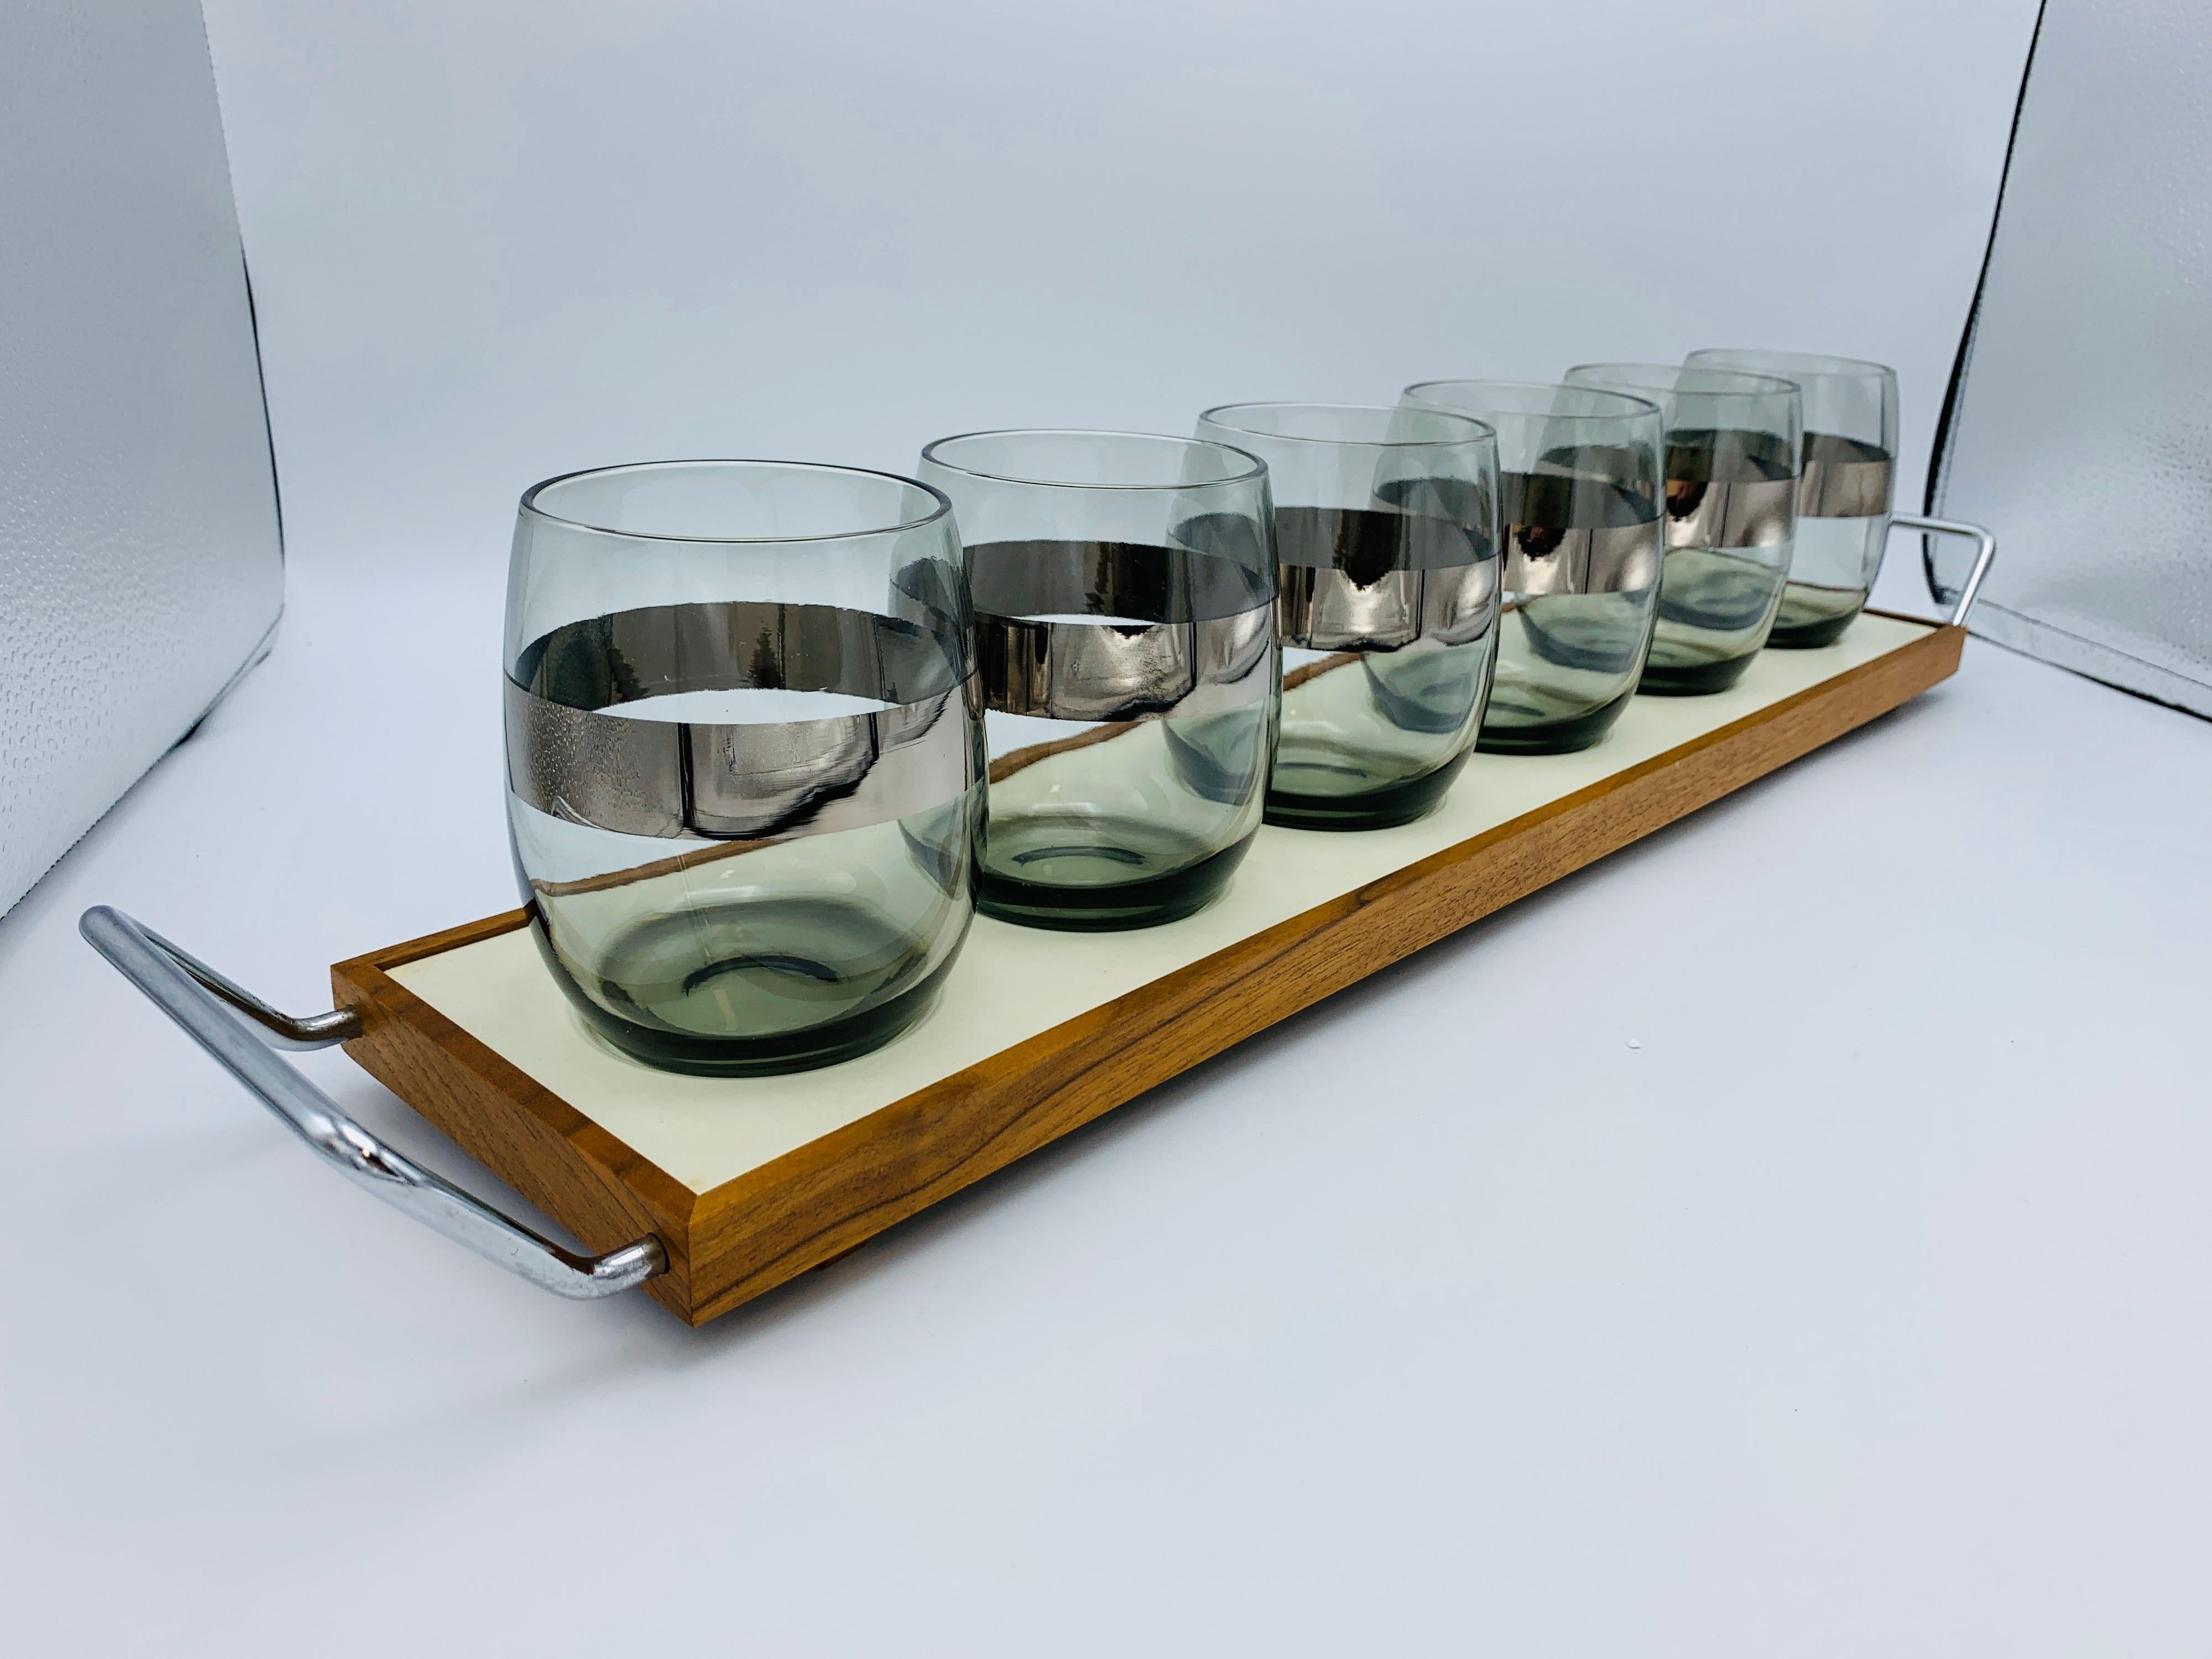 Listed is a set of six, 1960s Dorothy Thorpe cocktail stemless wine glasses with a walnut tray. The glasses have Dorothy Thorpe's signature silver detailing stripe towards the center of the glass. The walnut wood has slim, chrome handles on two